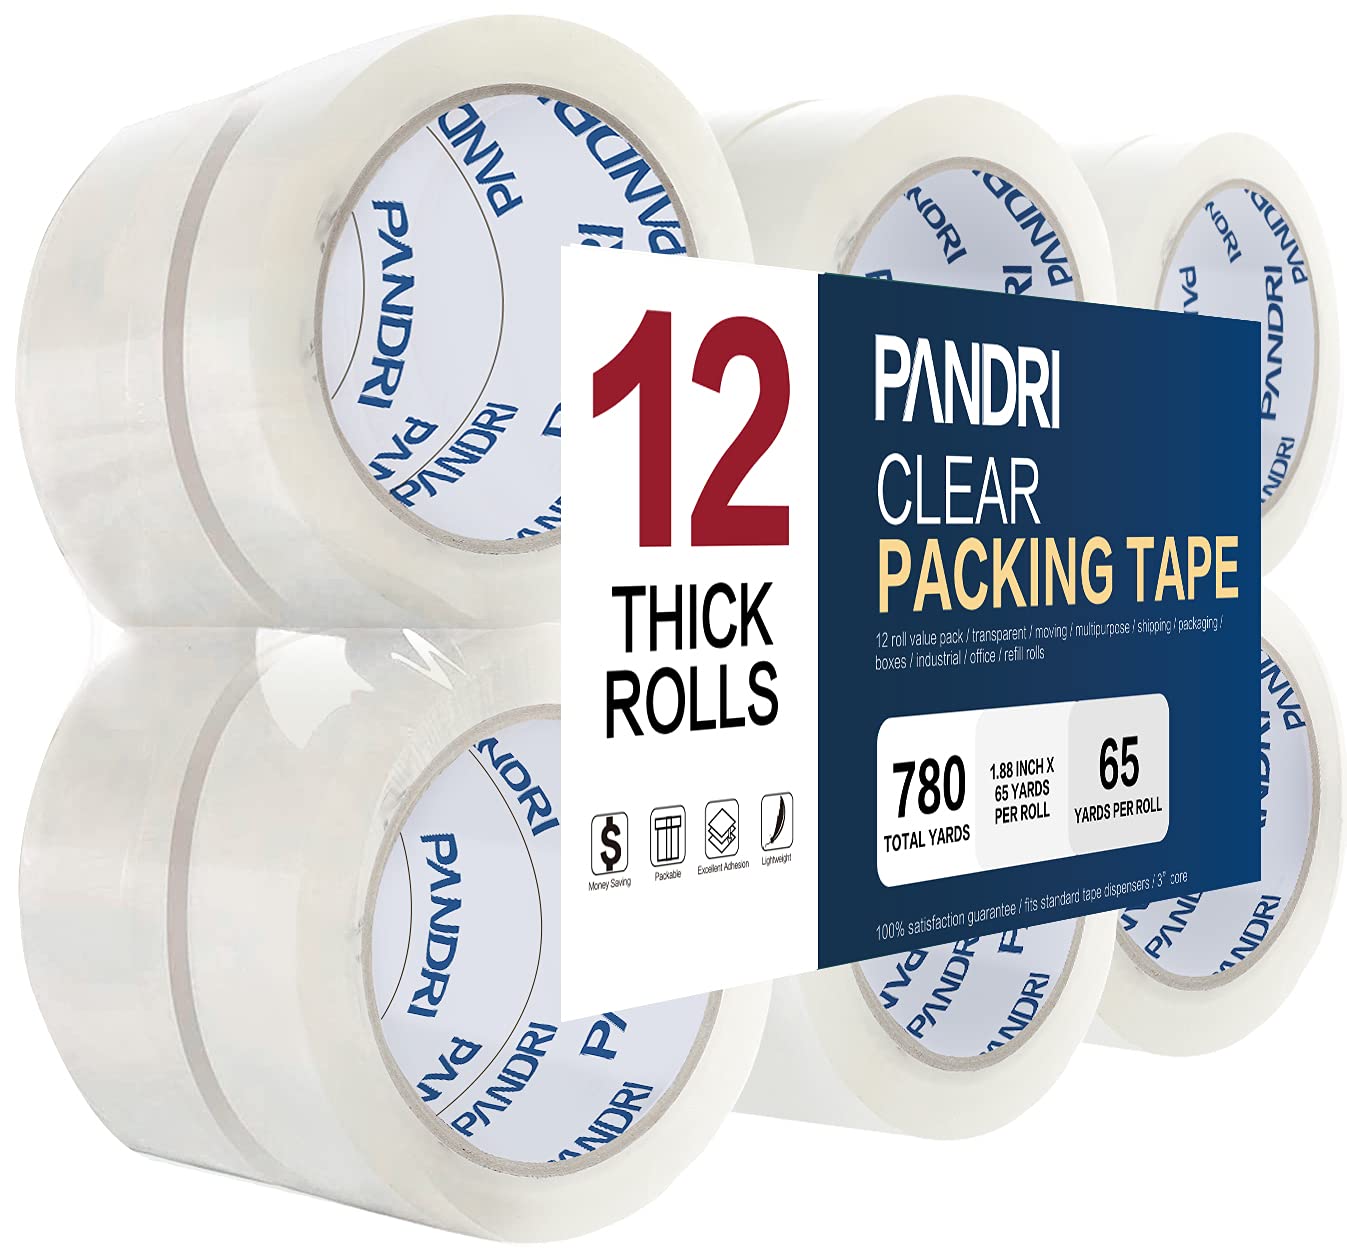 PANDRI Clear Packing Tape 12 Rolls Heavy Duty Packaging Tape for Shipping  Packaging Moving Sealing 1.88 inches Wide 65 Yards Per Roll Total 780 Yards